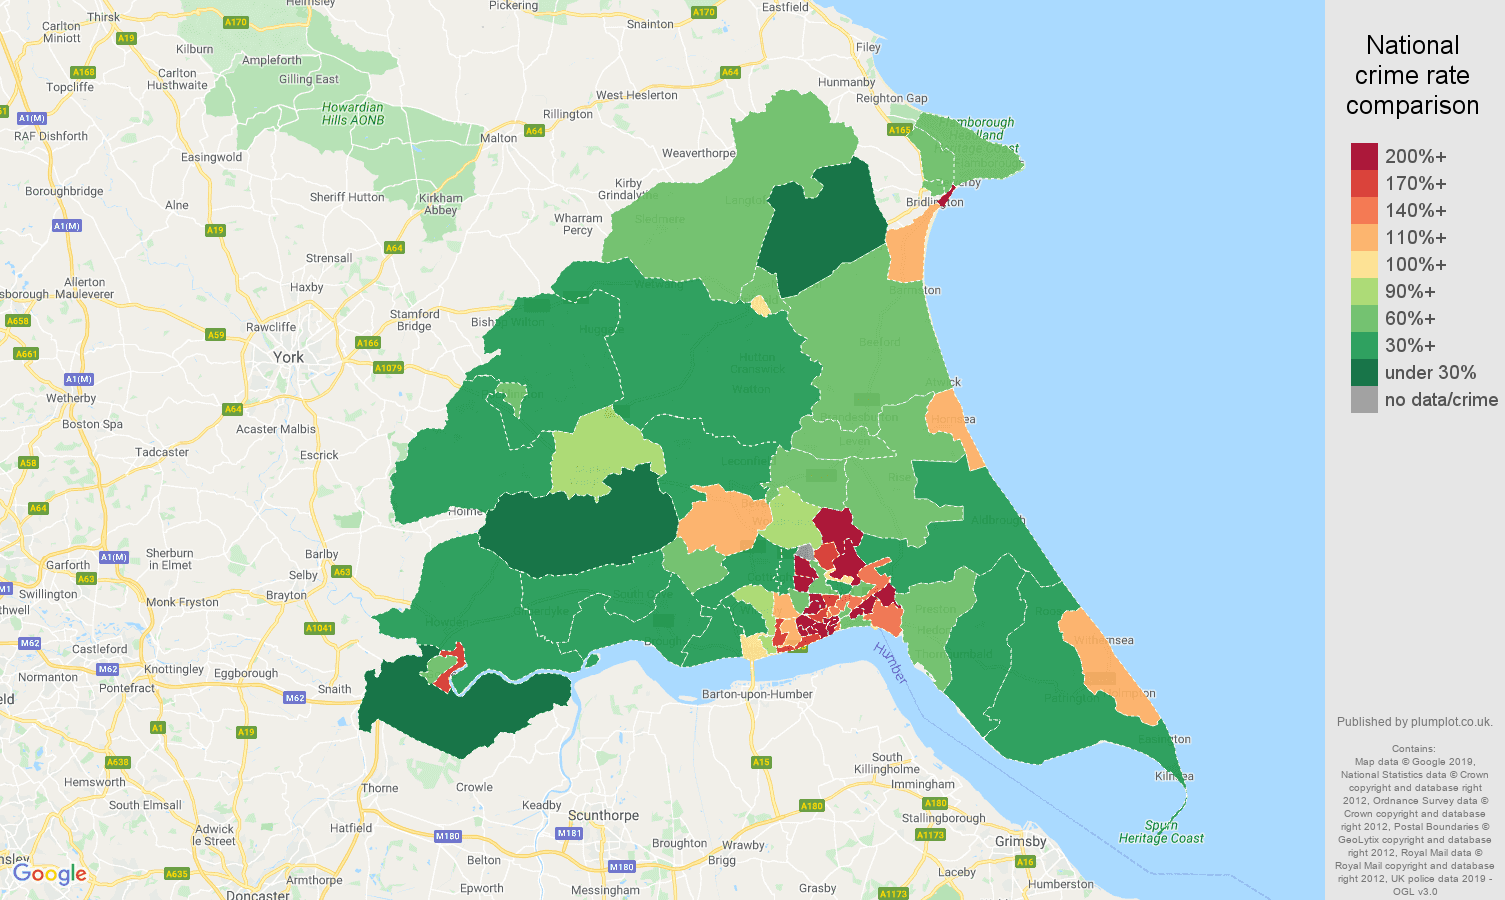 East Riding of Yorkshire public order crime rate comparison map